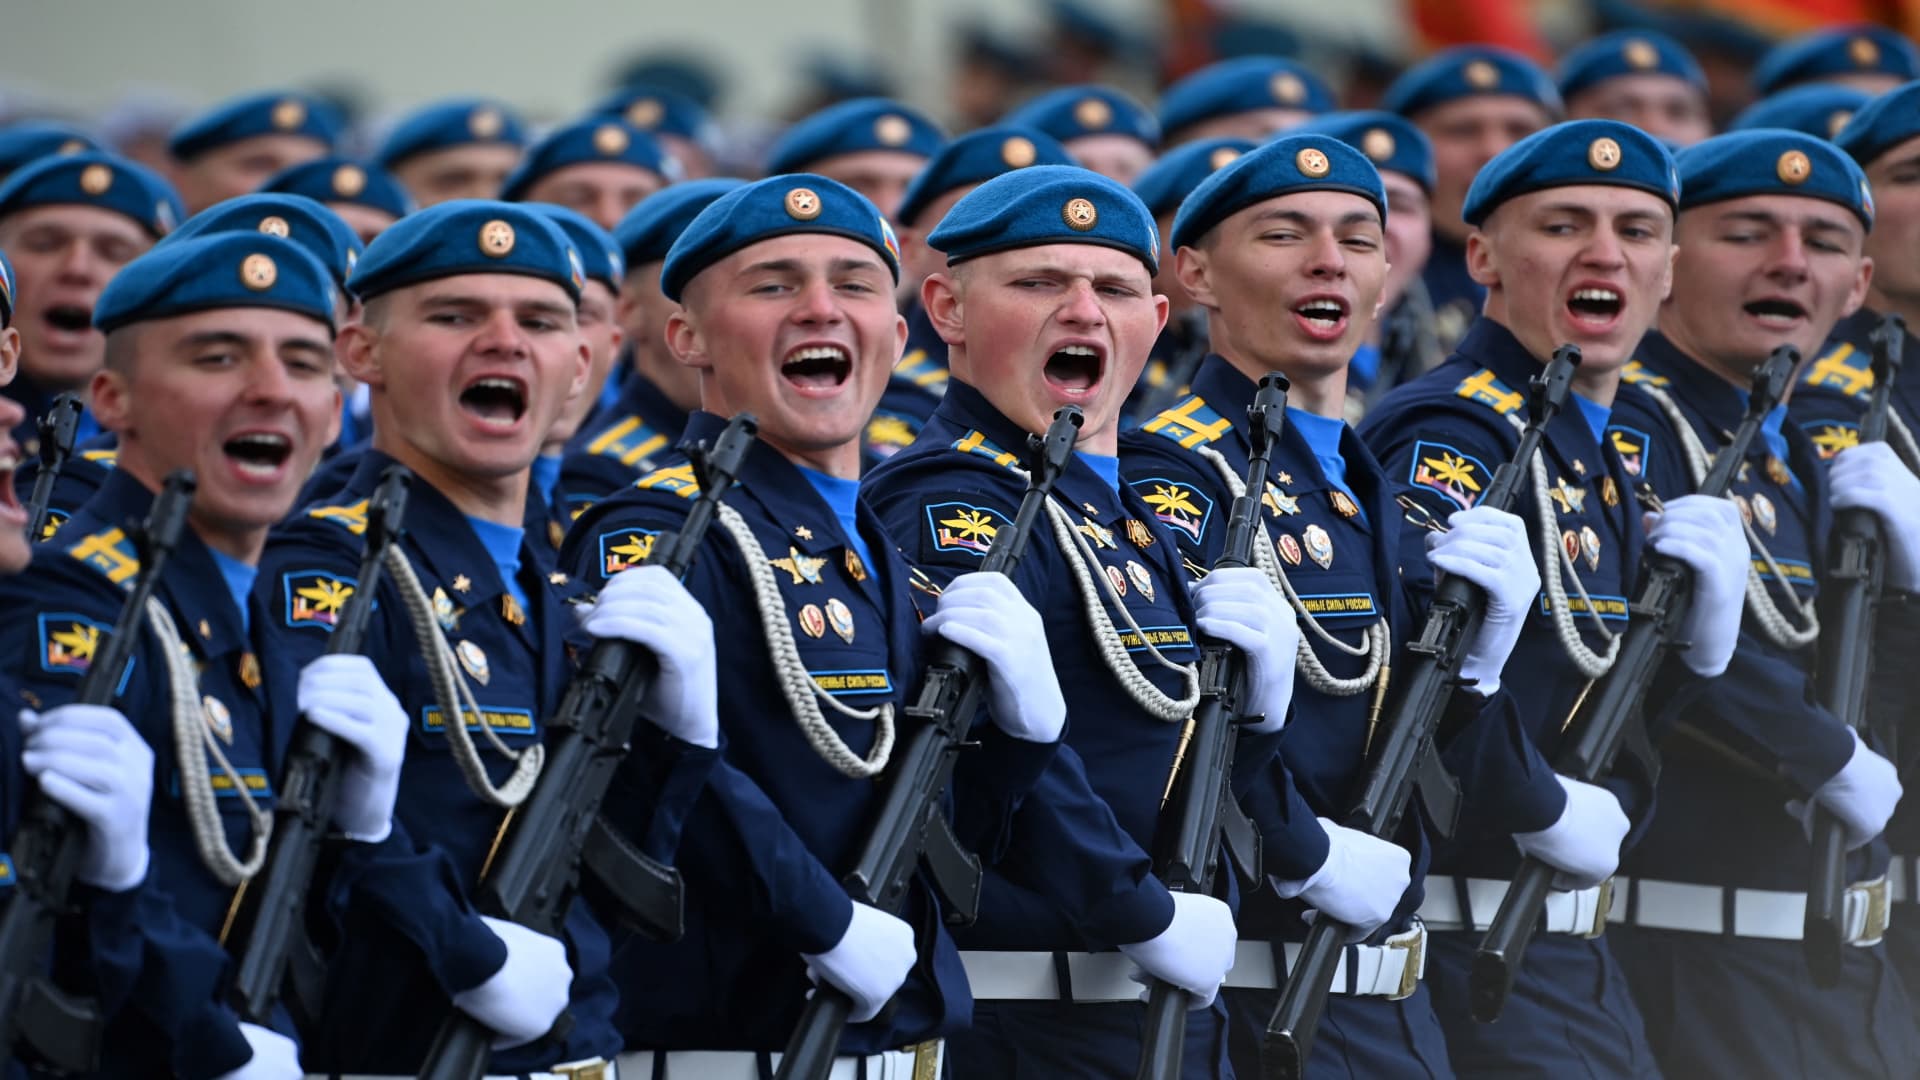 Russian servicemen march on Red Square during the Victory Day military parade in central Moscow on May 9, 2022. - Russia celebrates the 77th anniversary of the victory over Nazi Germany during World War II. (Photo by Kirill KUDRYAVTSEV / AFP) (Photo by KIRILL KUDRYAVTSEV/AFP via Getty Images)